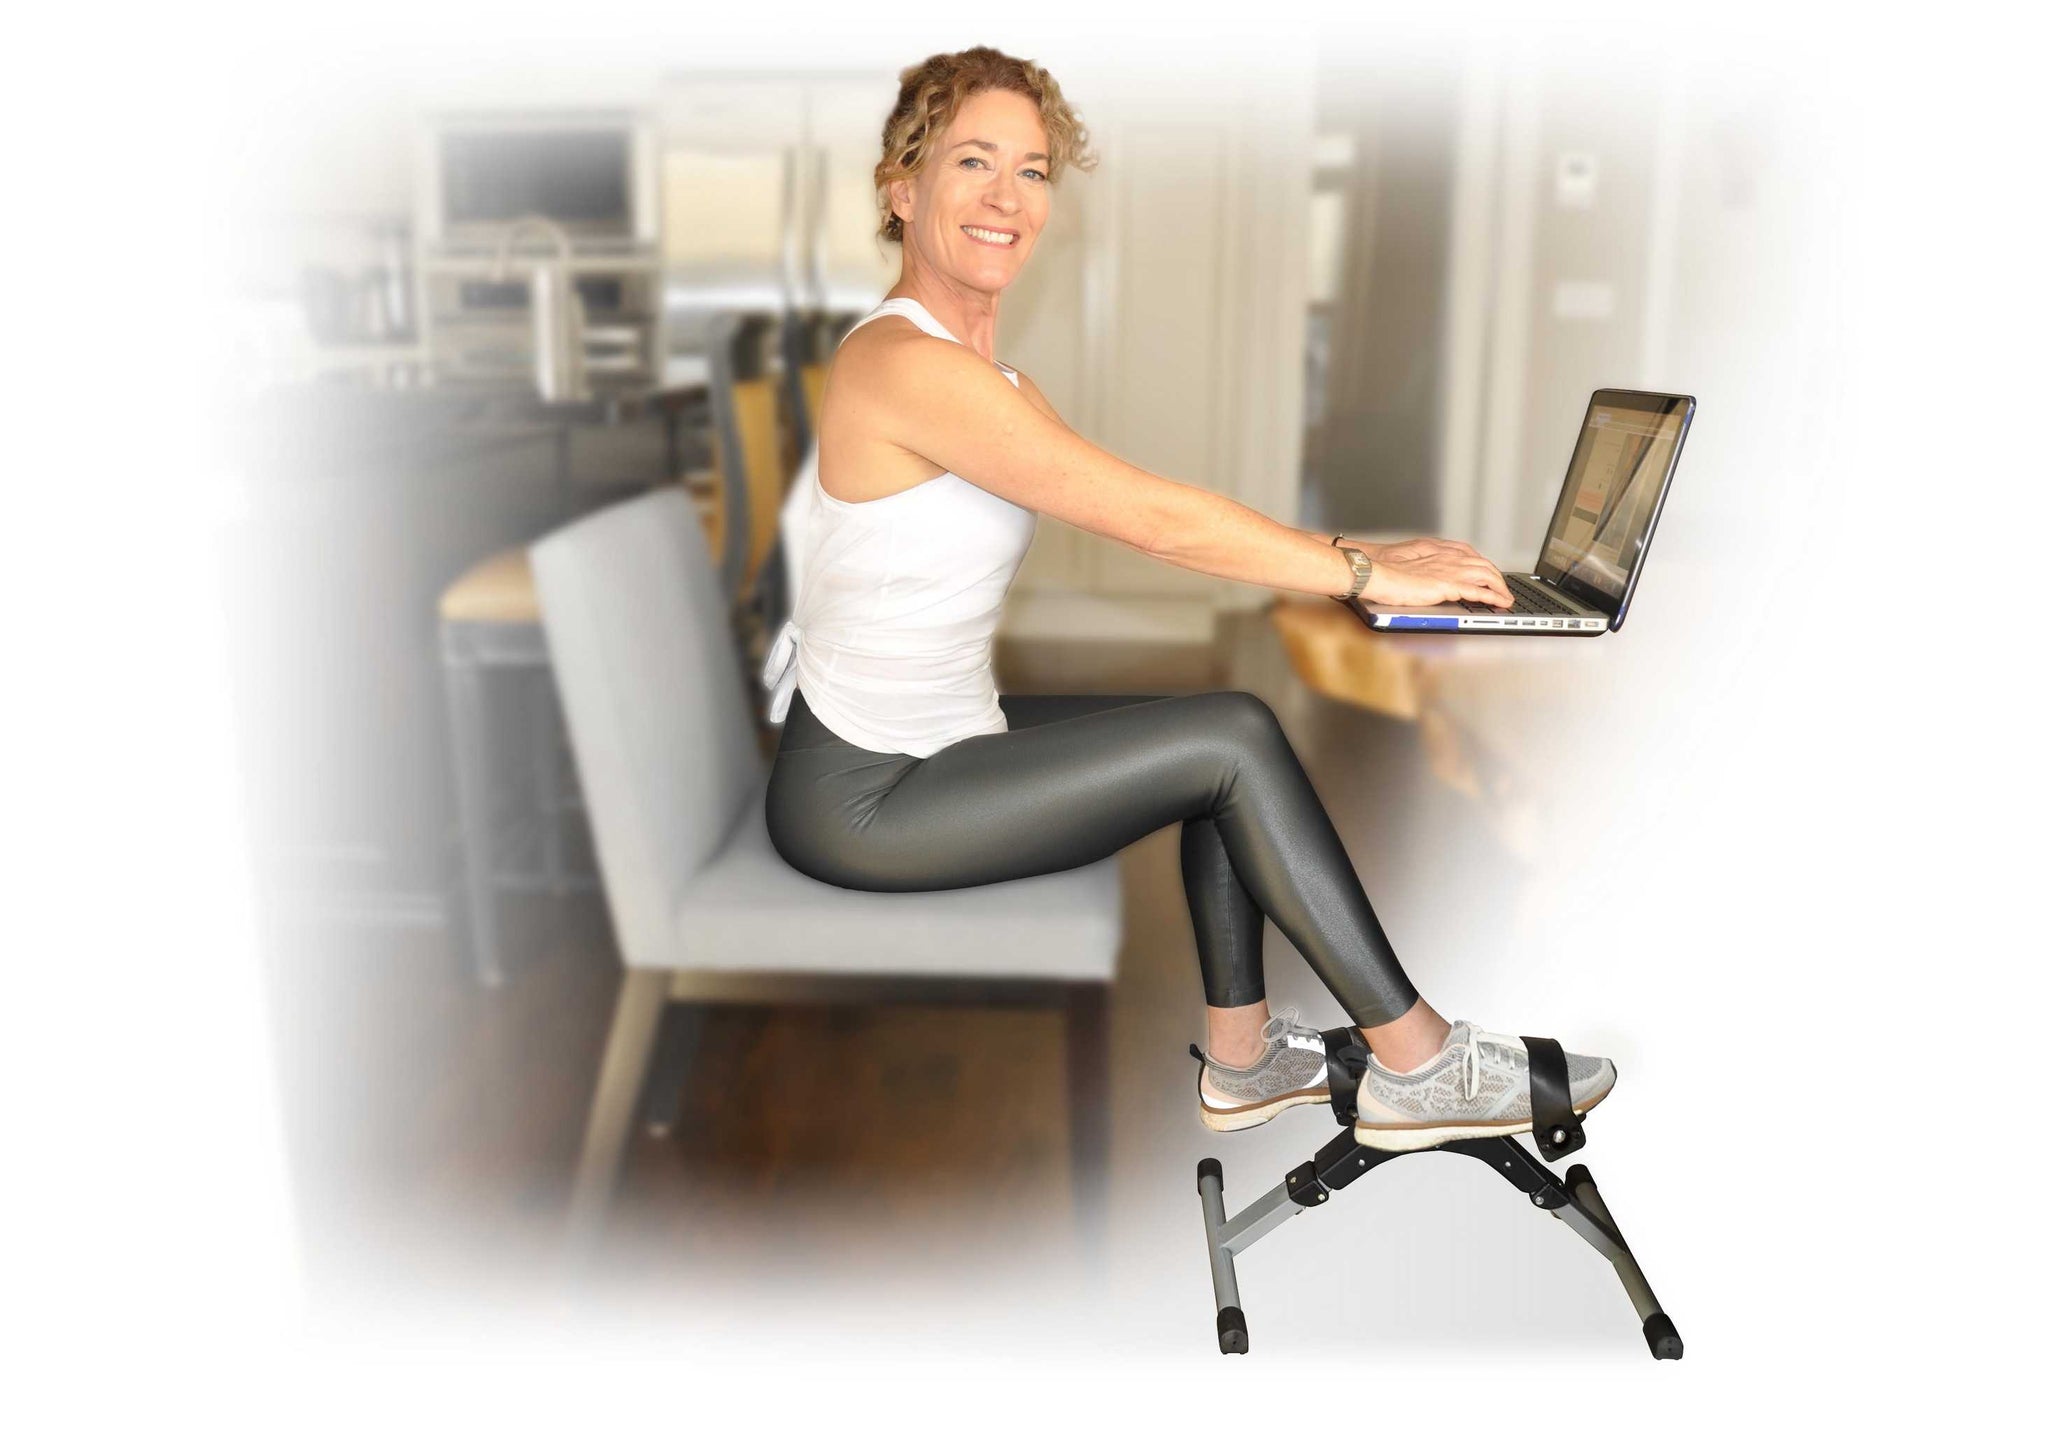 Motion Series C1 Mini Cycle, 2-in-1 Upper & Lower Body Exercise Cycle